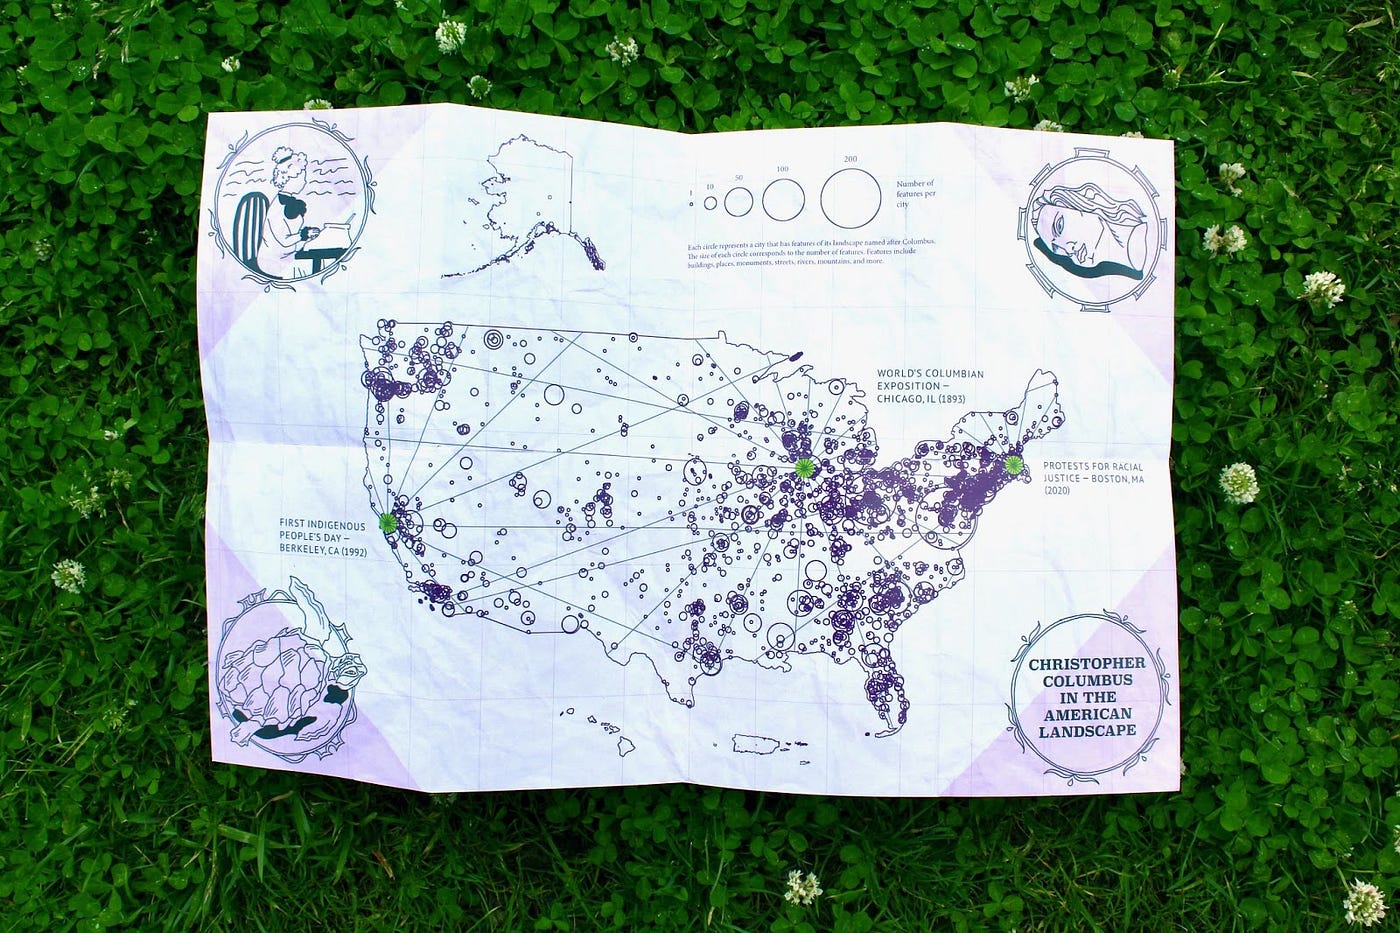 Open Map View of “We Never Wanted Him Here” Zine — “Christopher Columbus in The American Landscape” in Grass